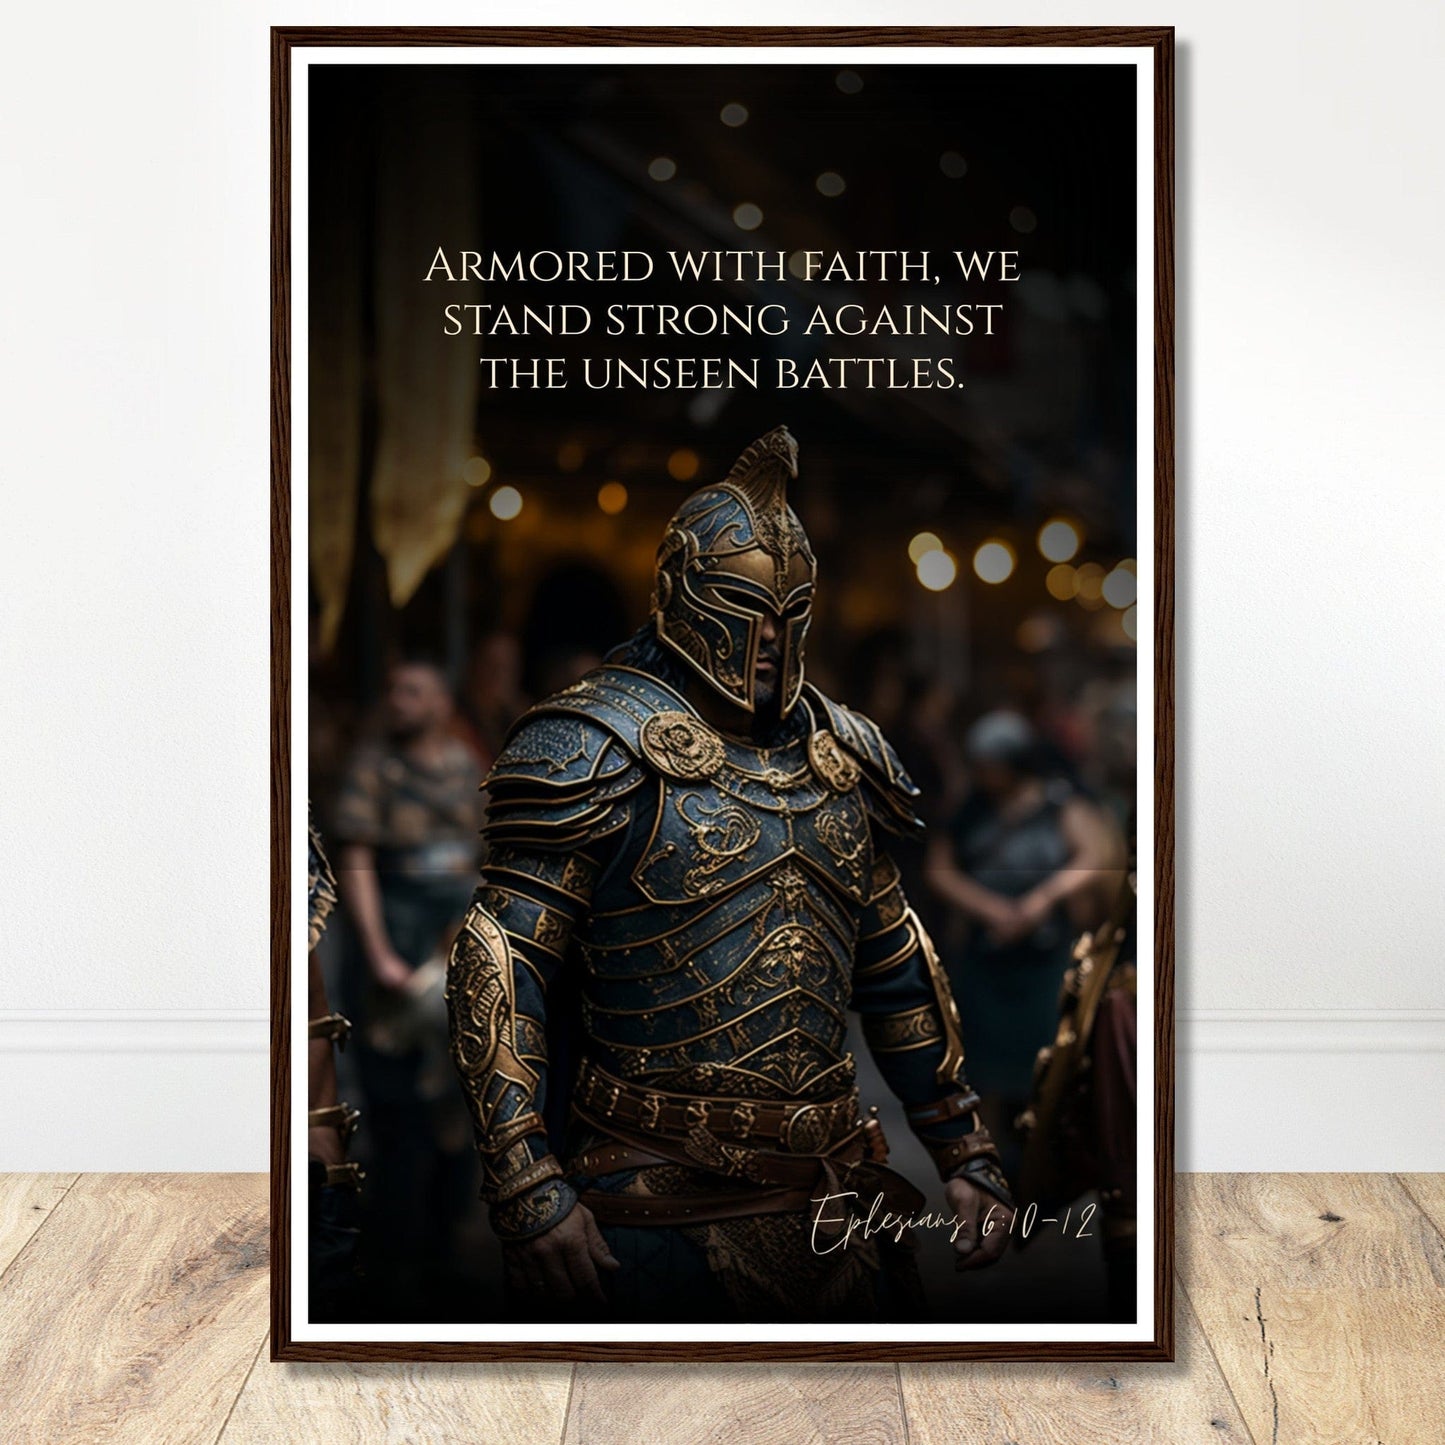 Coffee With My Father Print Material 60x90 cm / 24x36″ / Premium Matte Paper Wooden Framed Poster / Dark wood frame The Unseen Battles: Ephesians 6:10-12 - Artwork